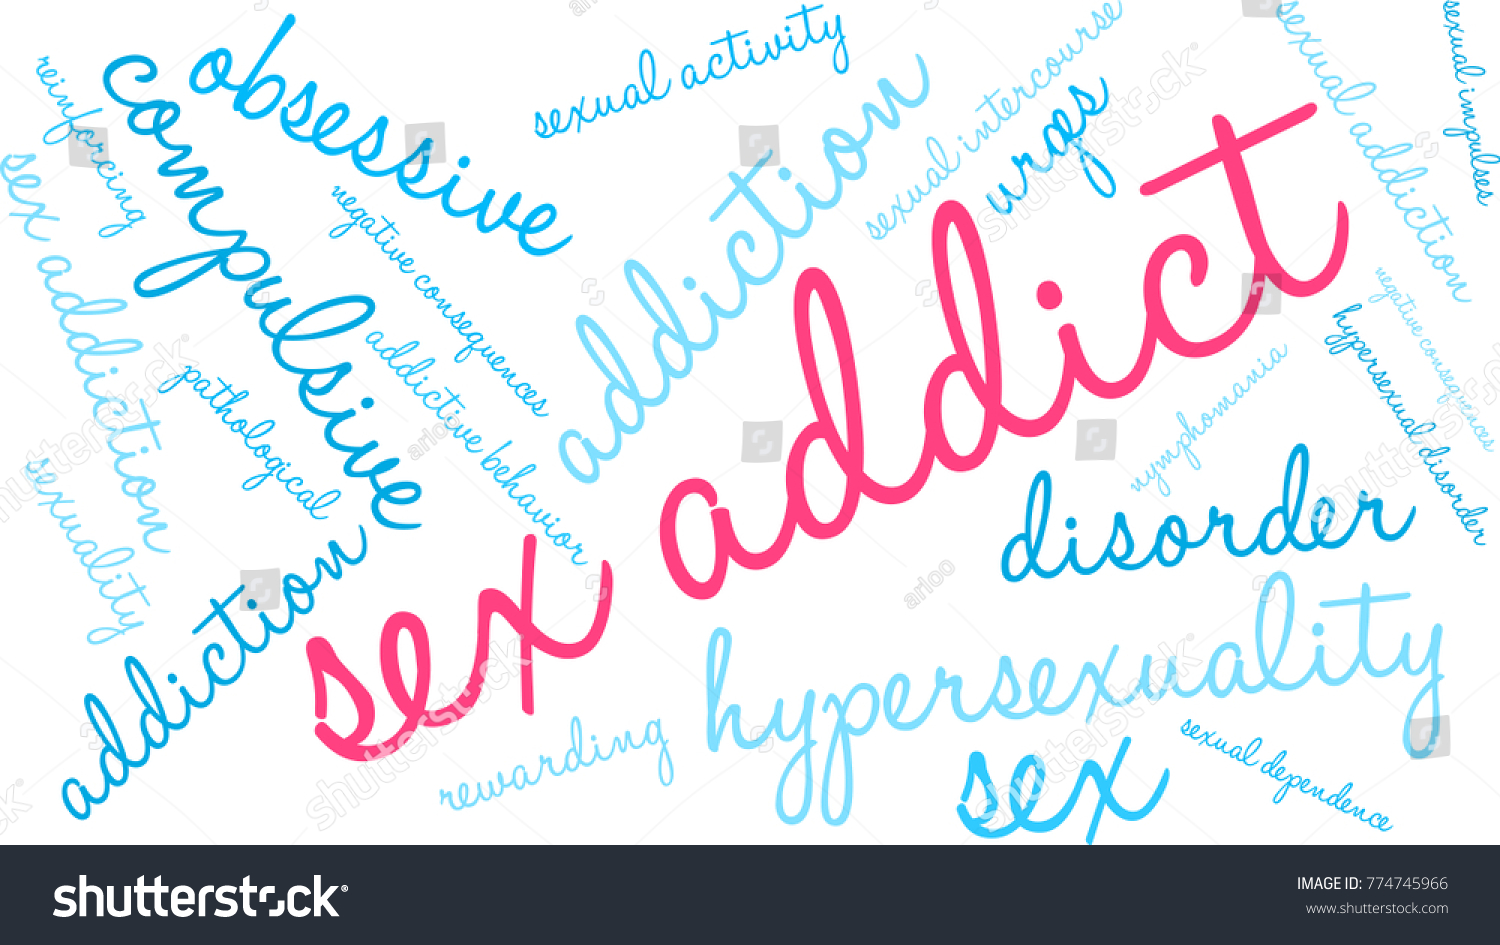 Sex Addict Word Cloud On White Stock Vector Royalty Free 774745966 Shutterstock